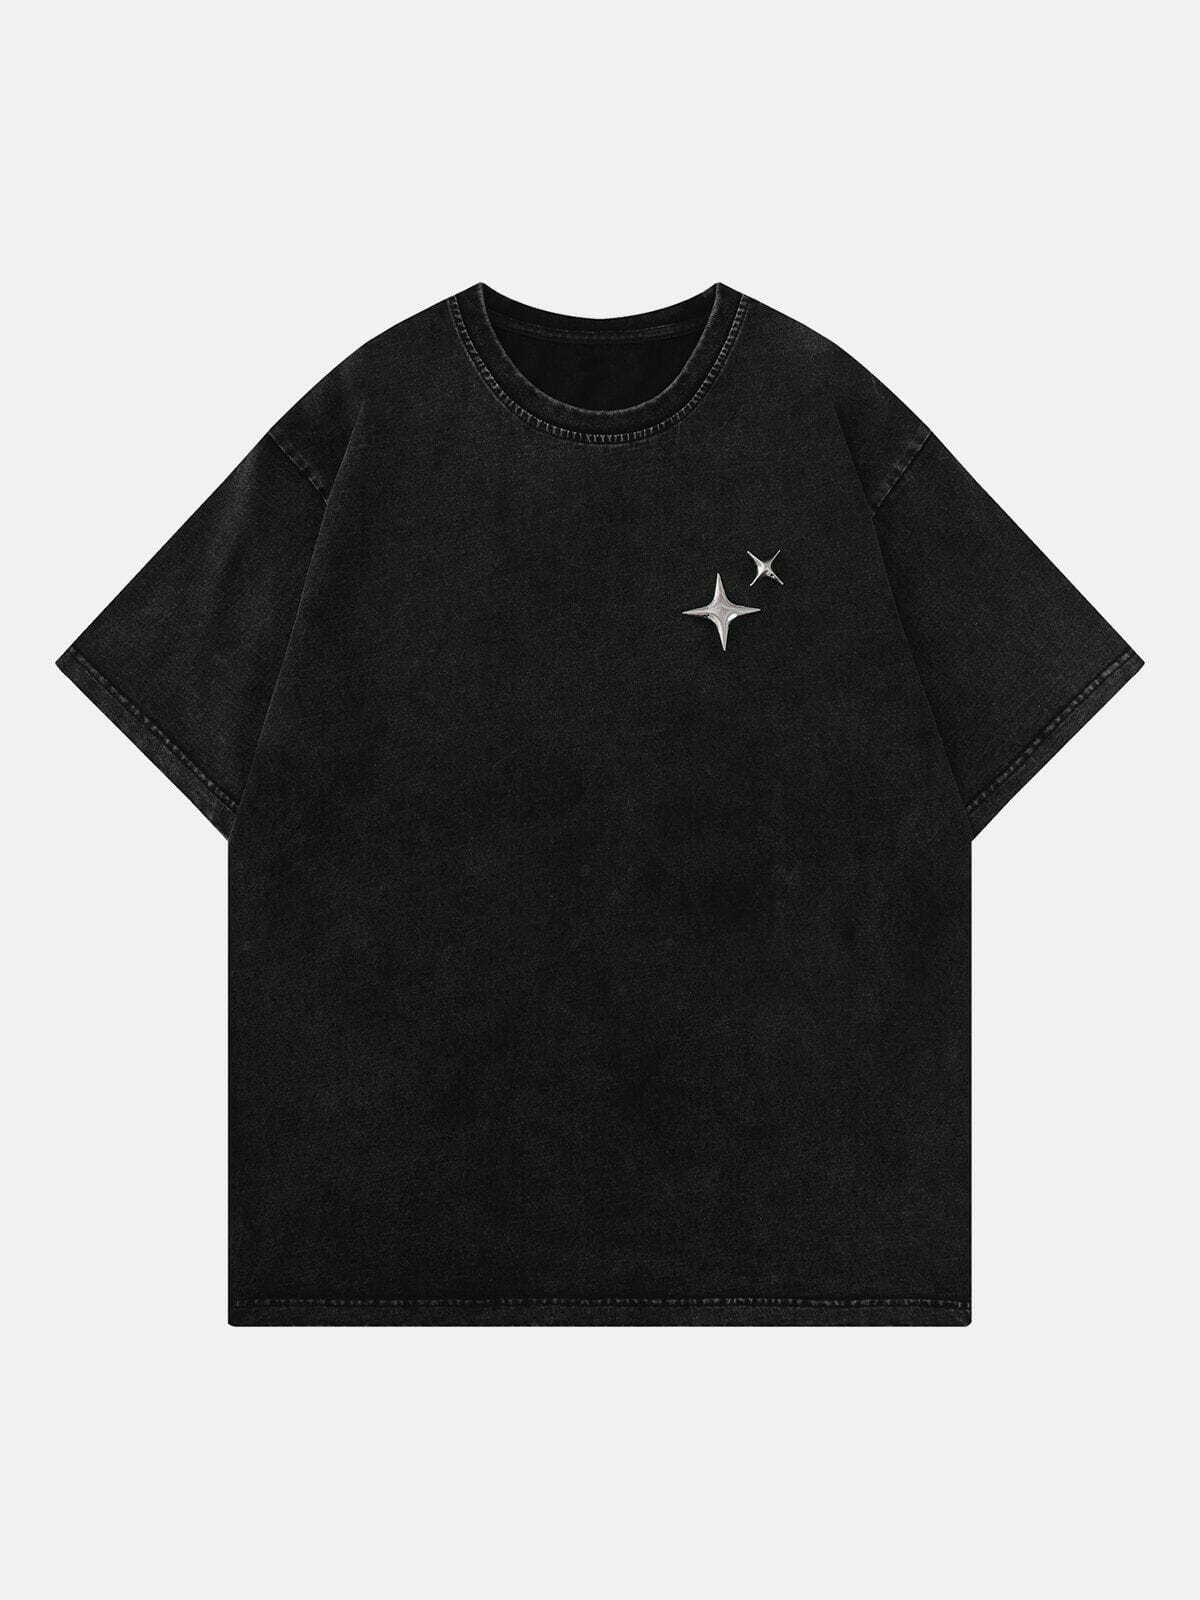 star print washed tee quirky cosmic streetwear 6518